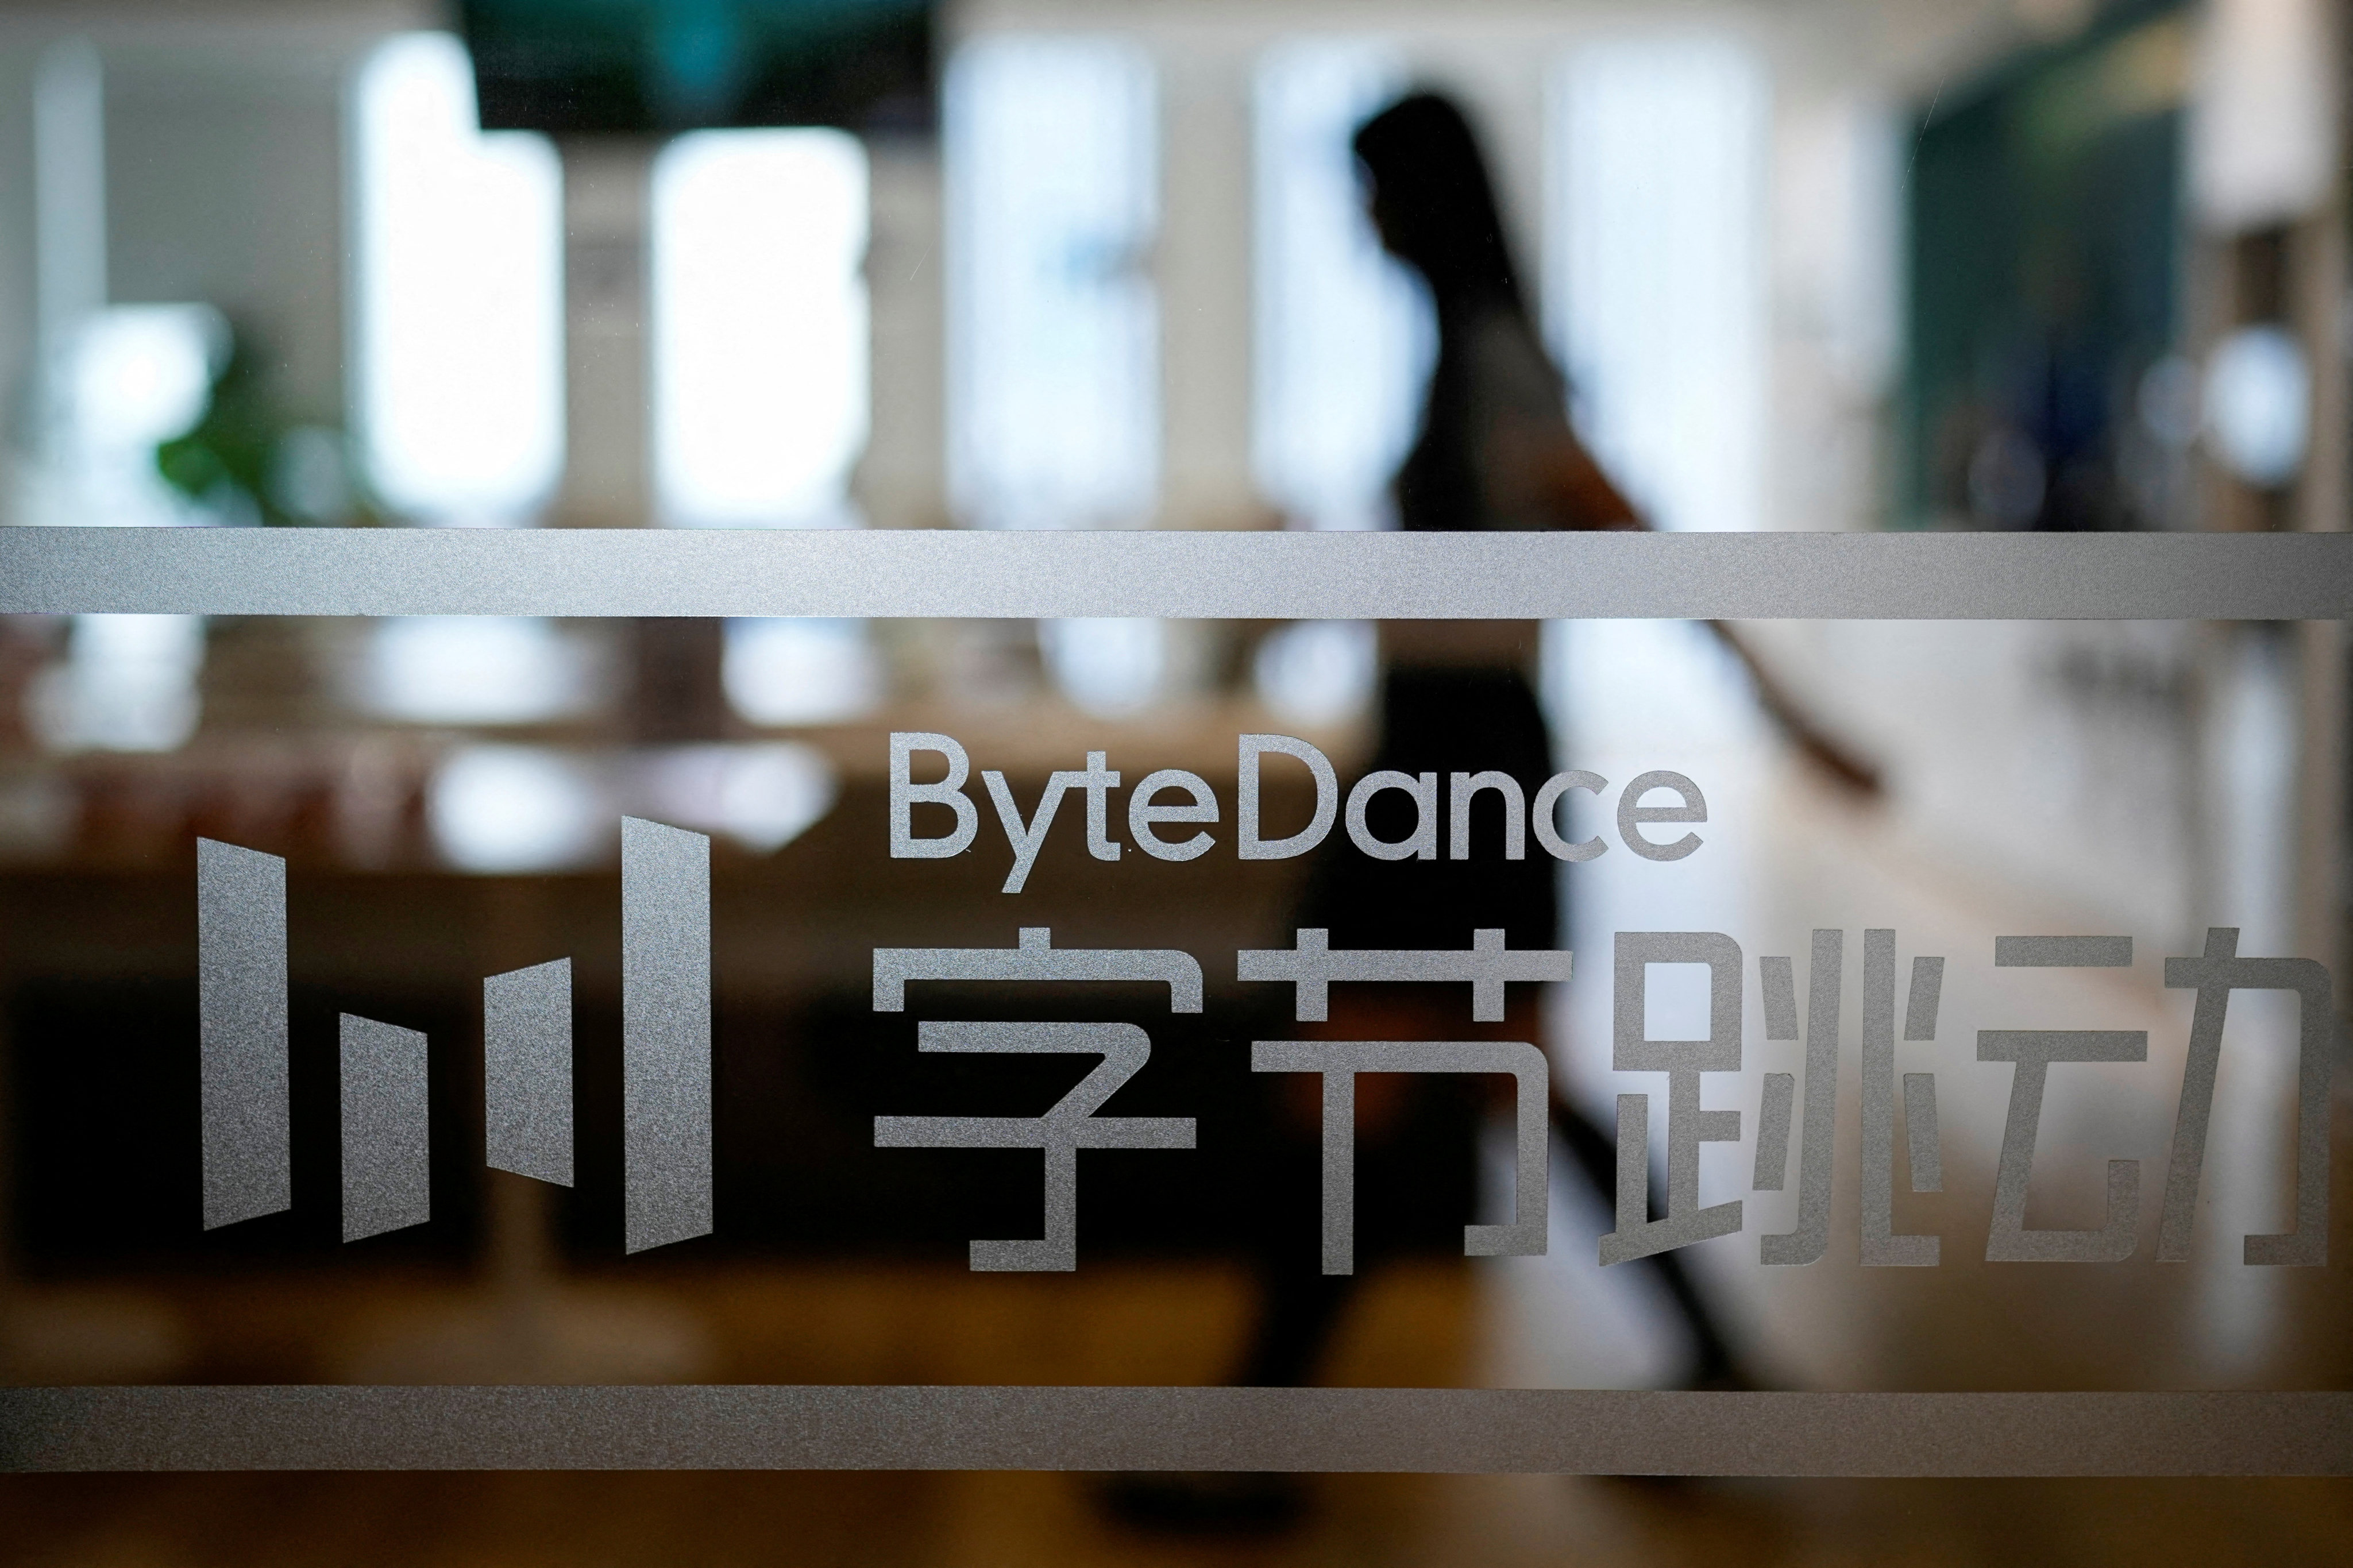 ByteDance’s office in Shanghai, China. Photo: Reuters